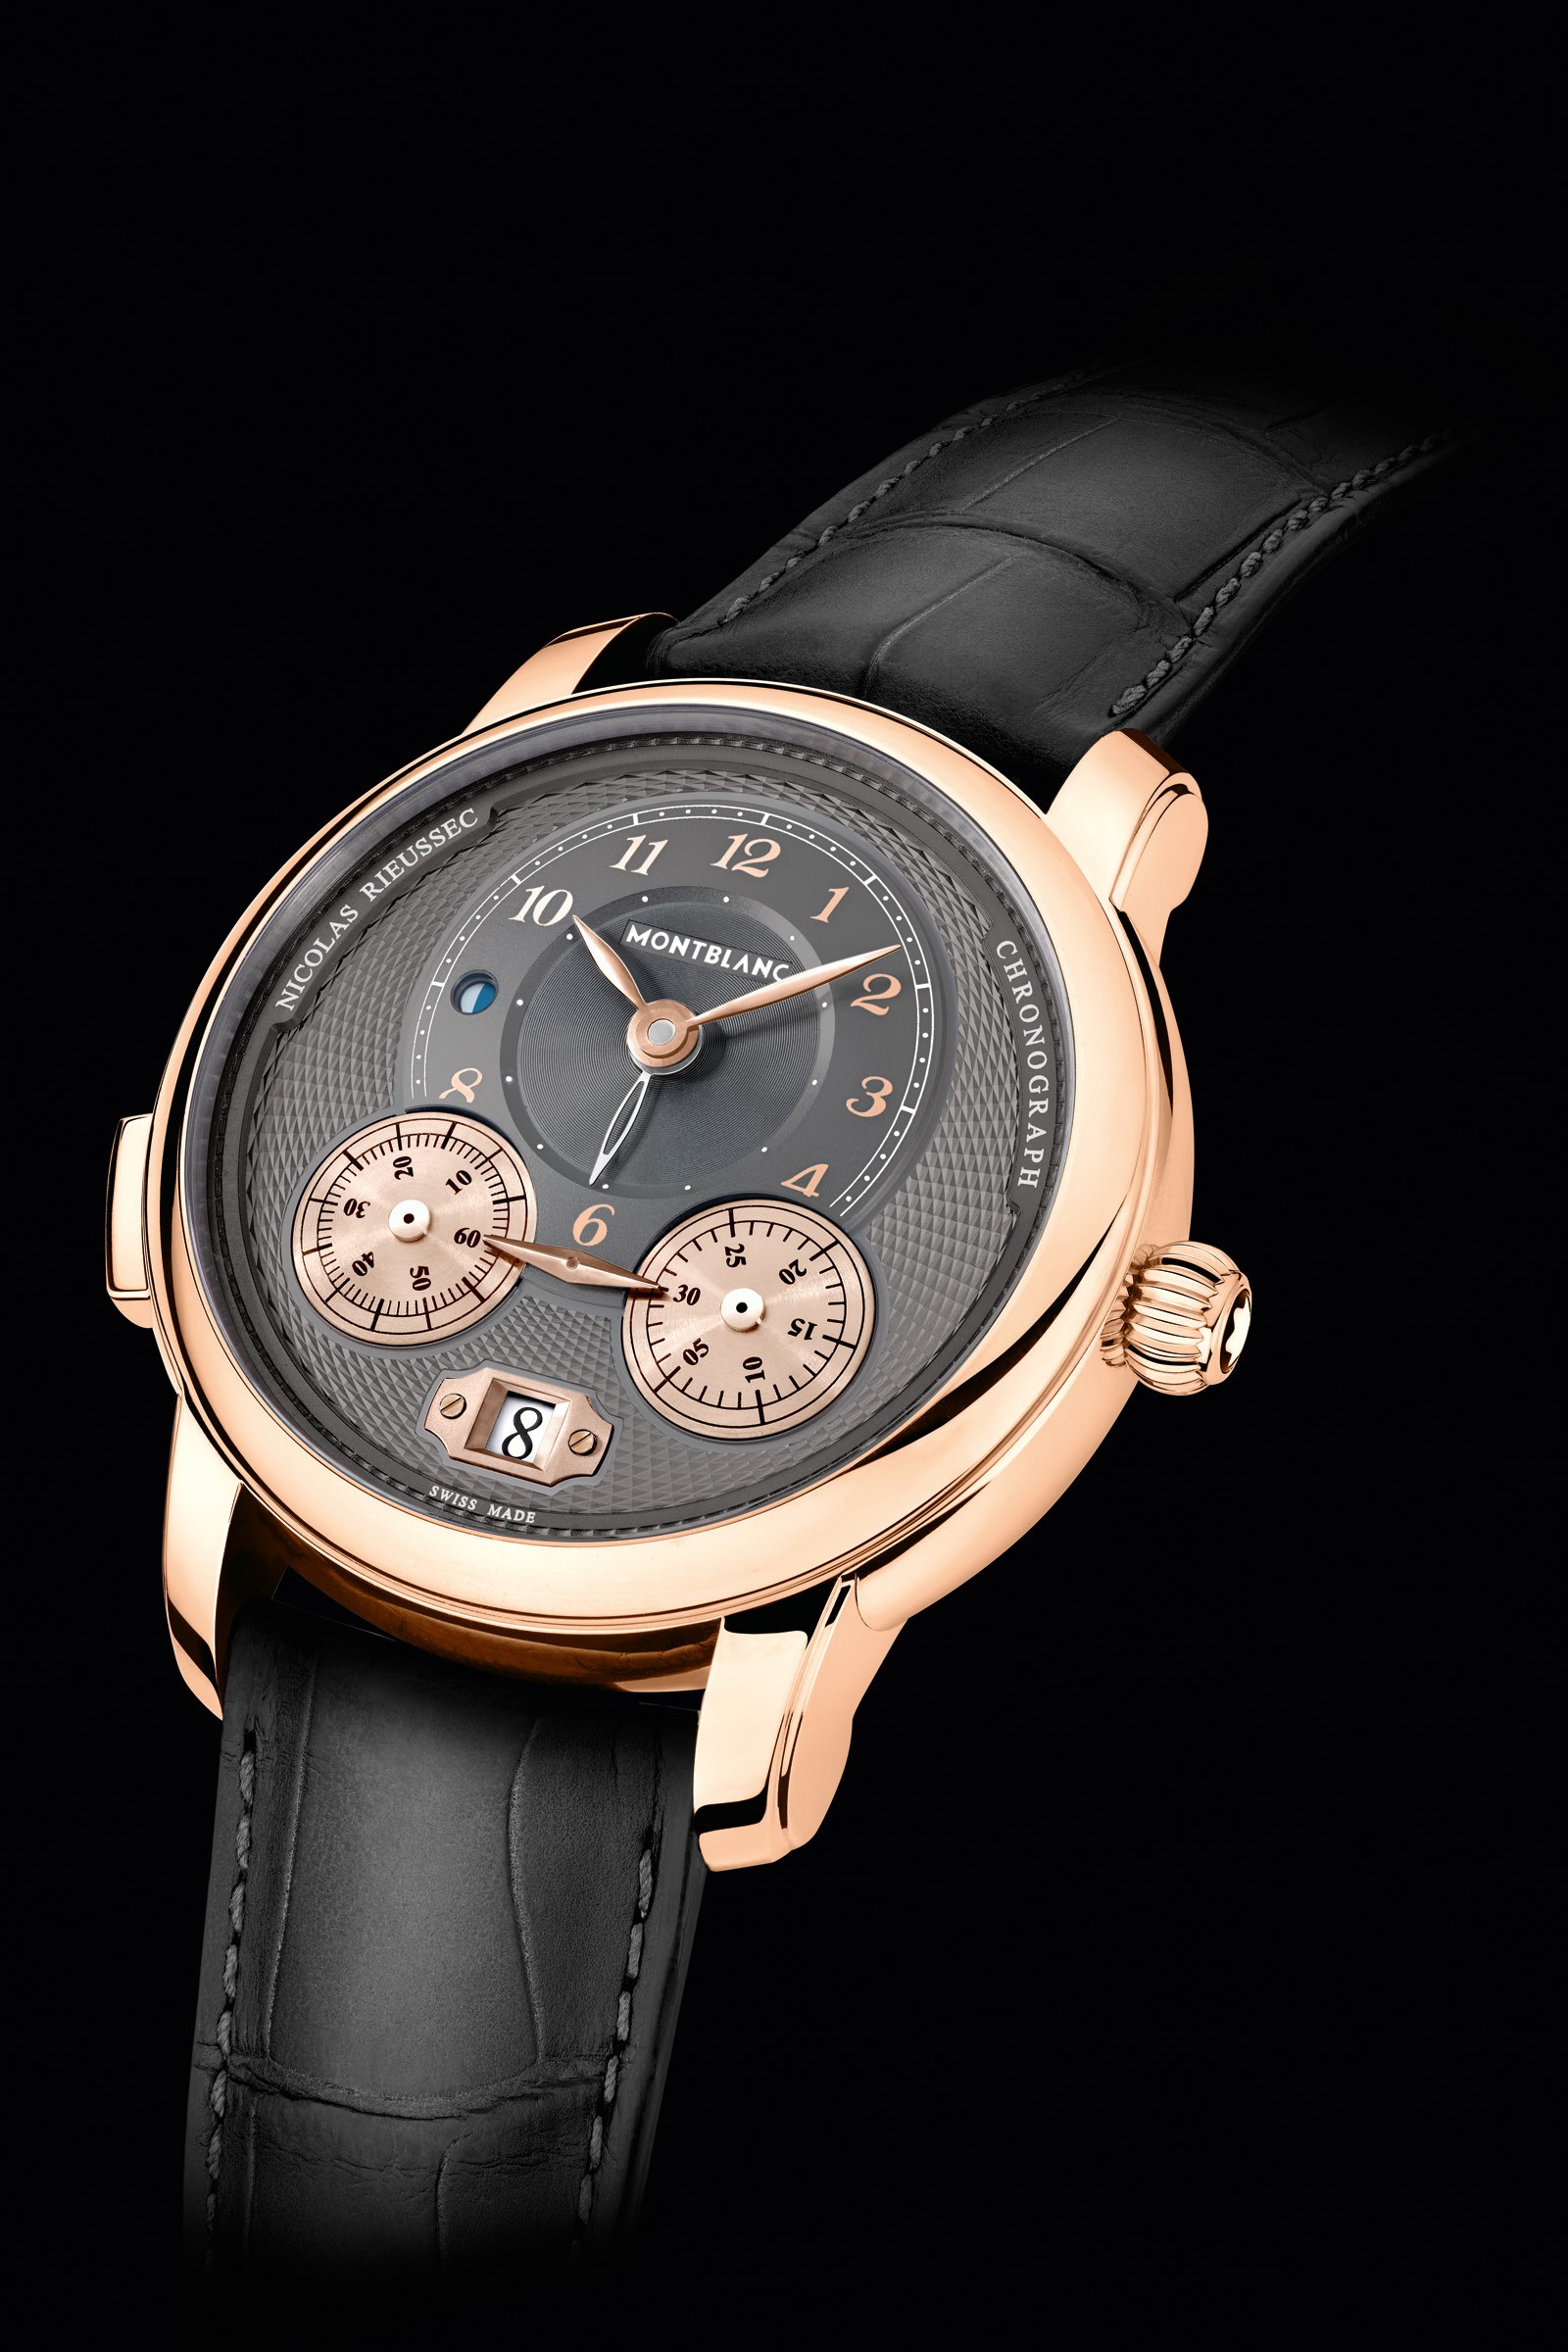 Montblanc’s rose gold Star Legacy Nicolas Rieussec Chronograph, featuring an anthracite dial, is just one of the luxury brand’s timepieces on show at this week’s SIHH 2019 watch fair in Geneva.